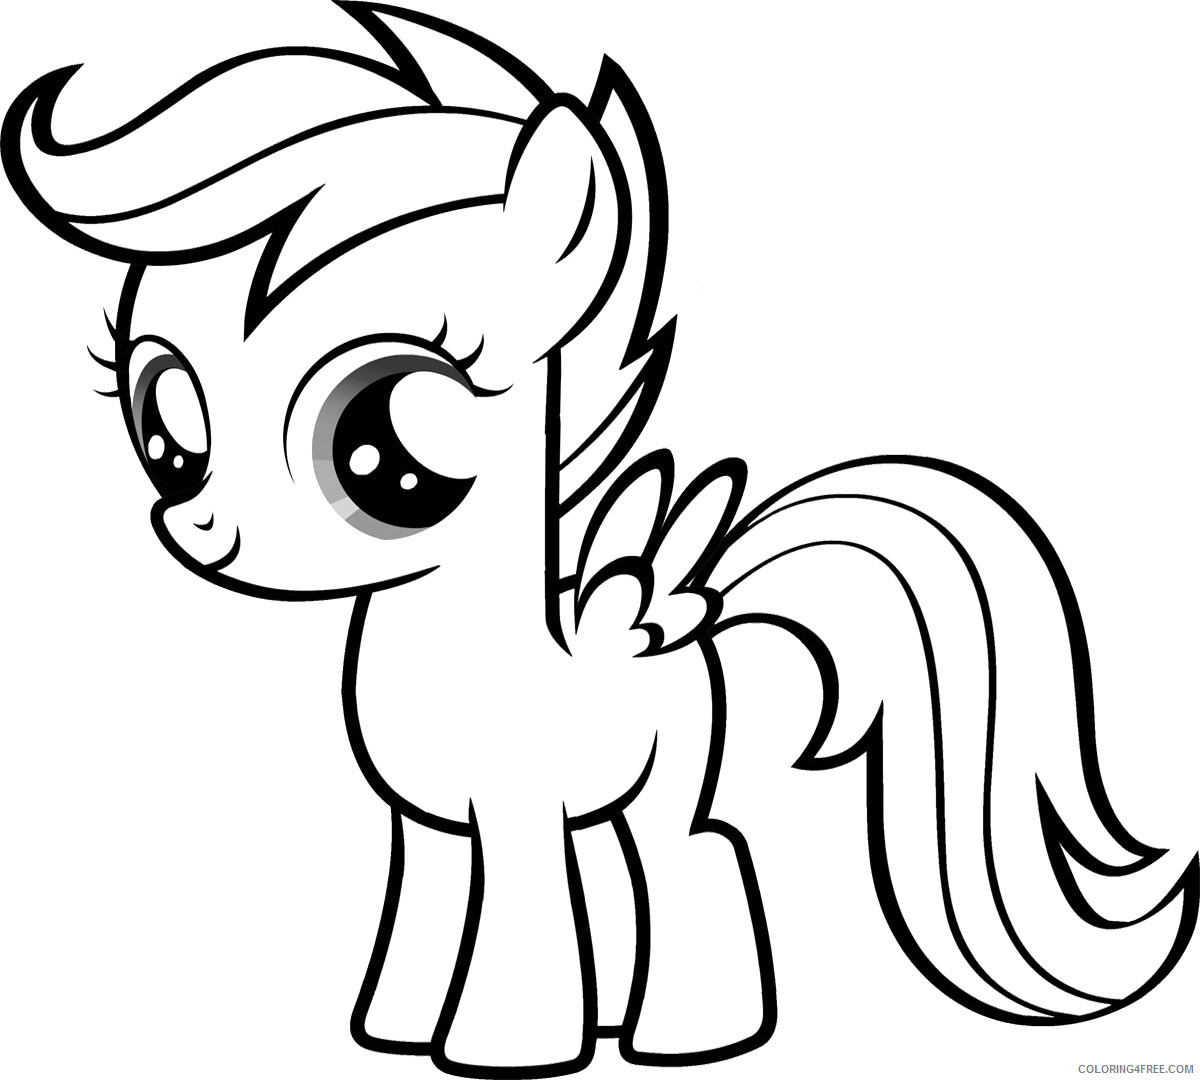 My Little Pony Coloring Pages Cartoons My Little Pony Pictures to Printable 2020 4571 Coloring4free